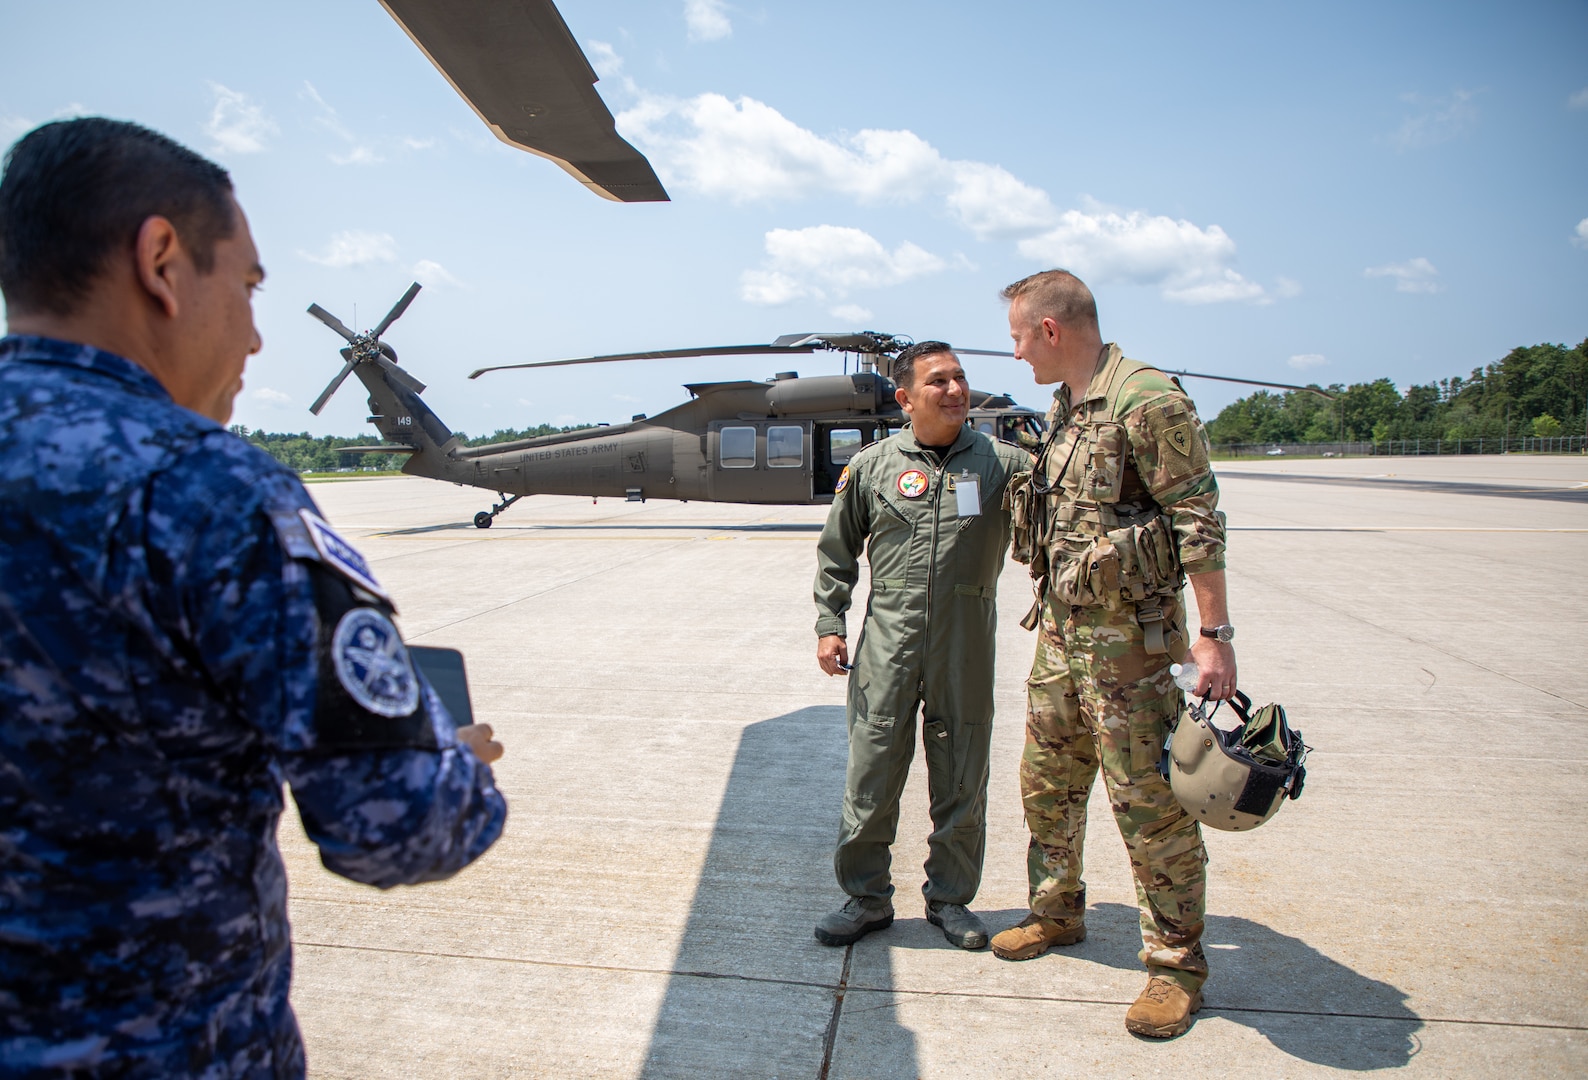 From left, Col. Saúl Orantes, commander of First Air Brigade, Salvadoran Air Force, poses for a photo with Chief Warrant Officer 3 Luke Koladish, a pilot with Charlie Company, 3rd Battalion, 238th Aviation Regiment (MEDEVAC), prior to boarding their flight July 11, 2023, at the Army Aviation Support Facility in Concord, New Hampshire.